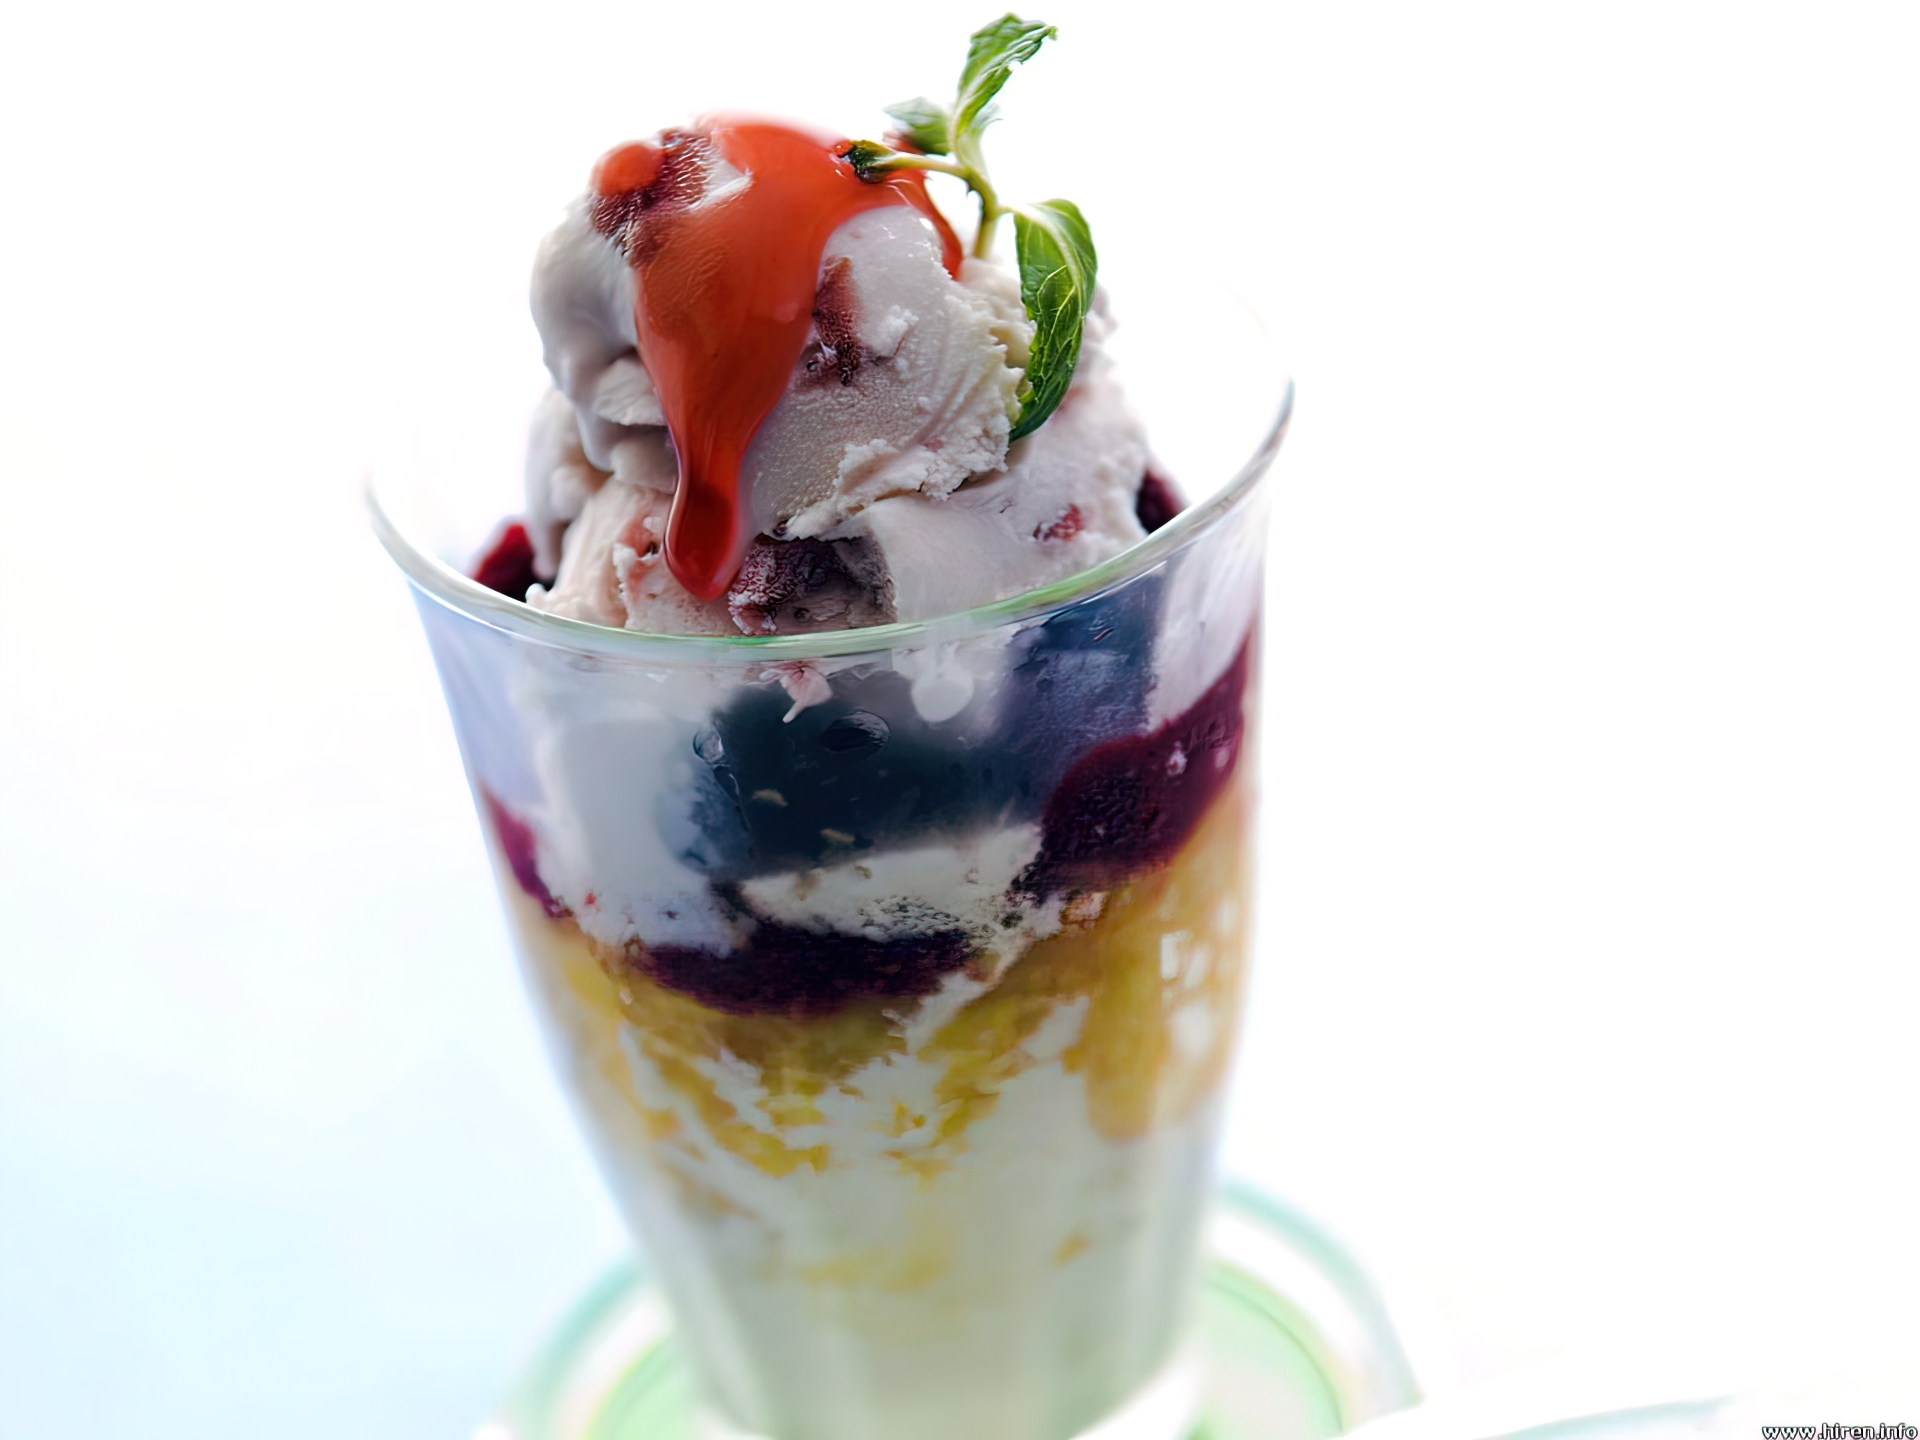 Delicious ice cream sundae with colorful toppings and a cherry on top